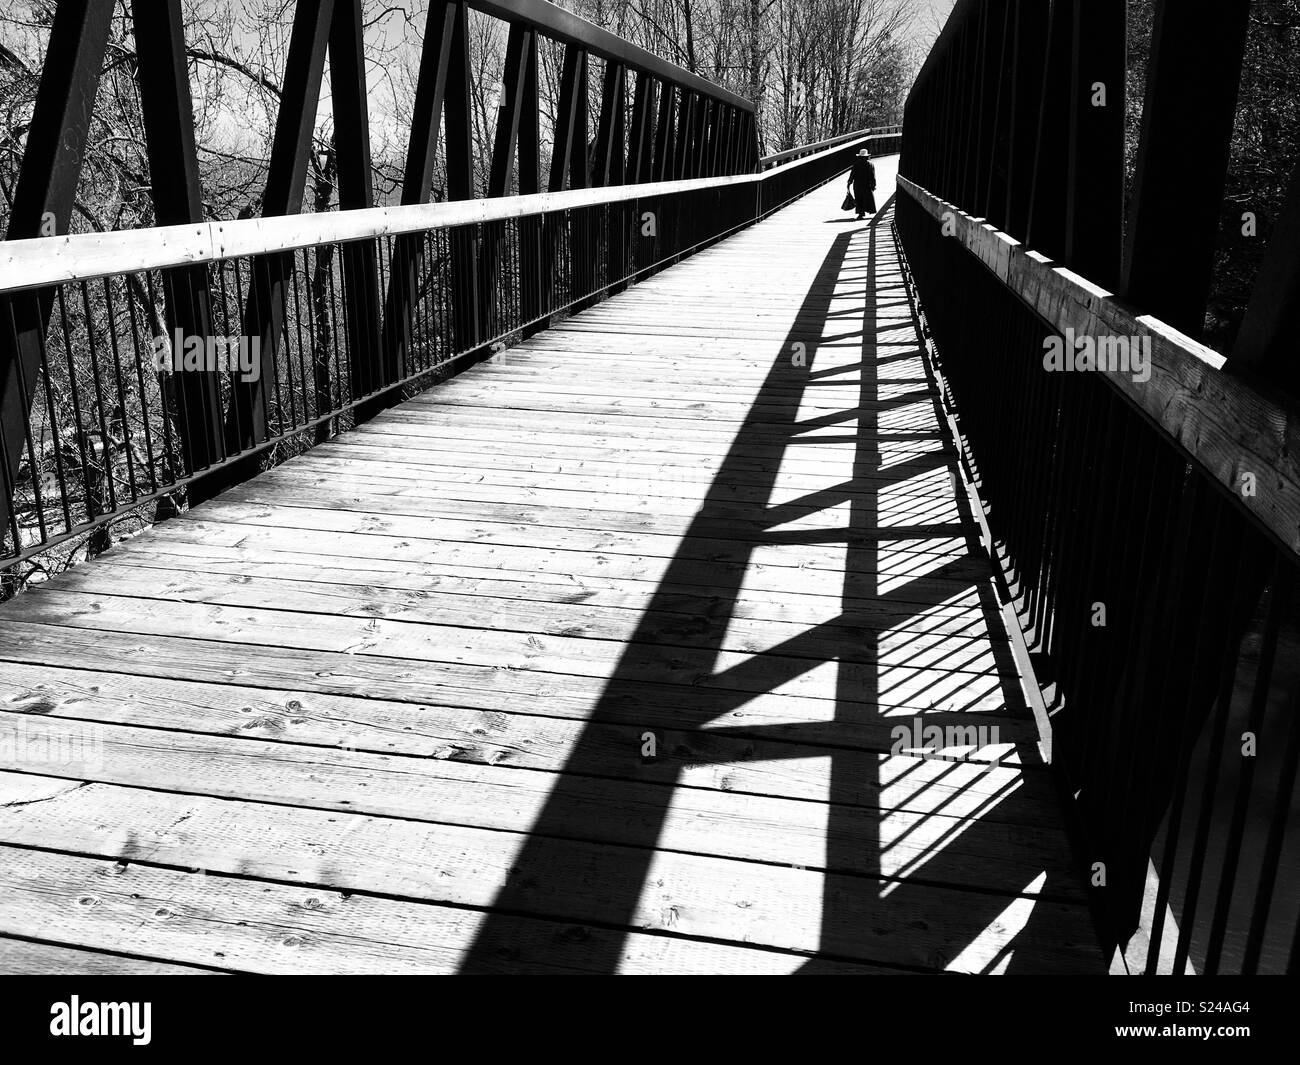 Lonely person walking on a wooden bridge. Black and white. Stock Photo